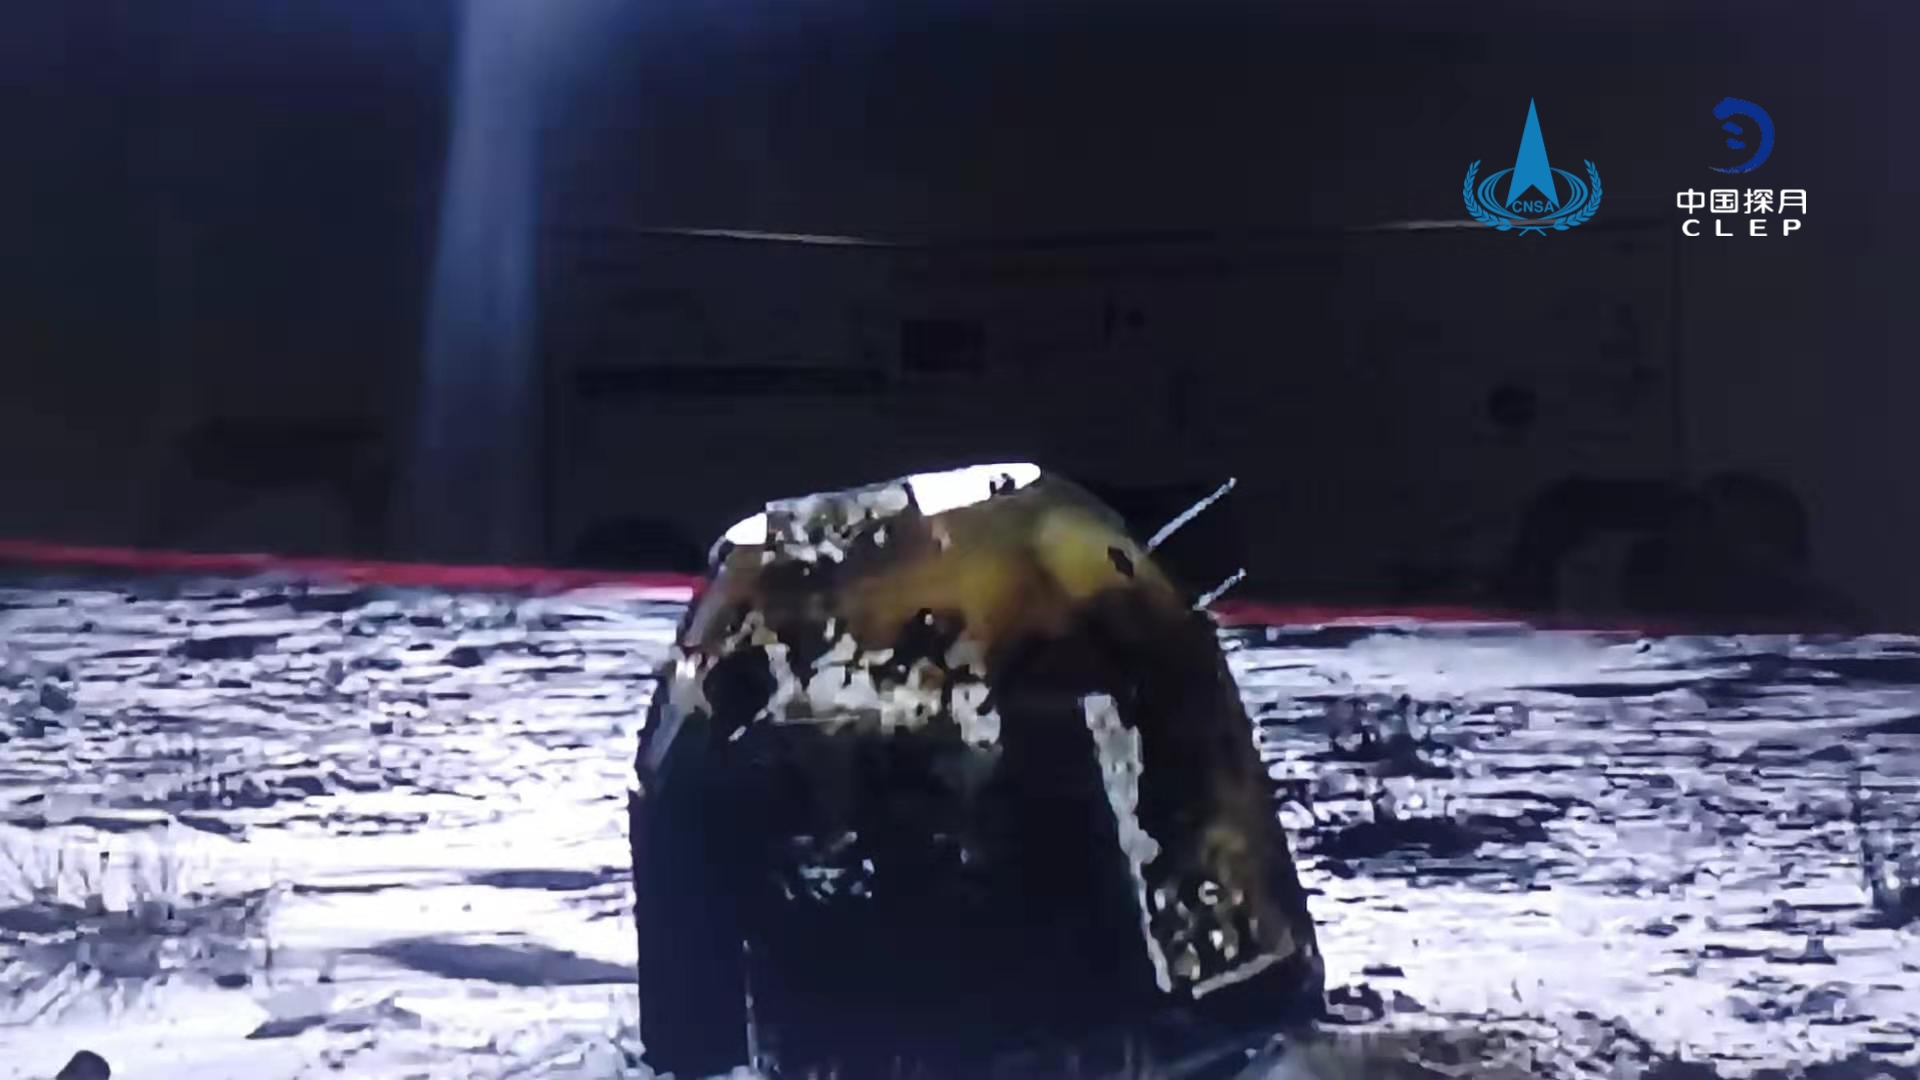 China’s Chang’e 5 capsule lands on Earth with the 1st current moon samples in 44 years